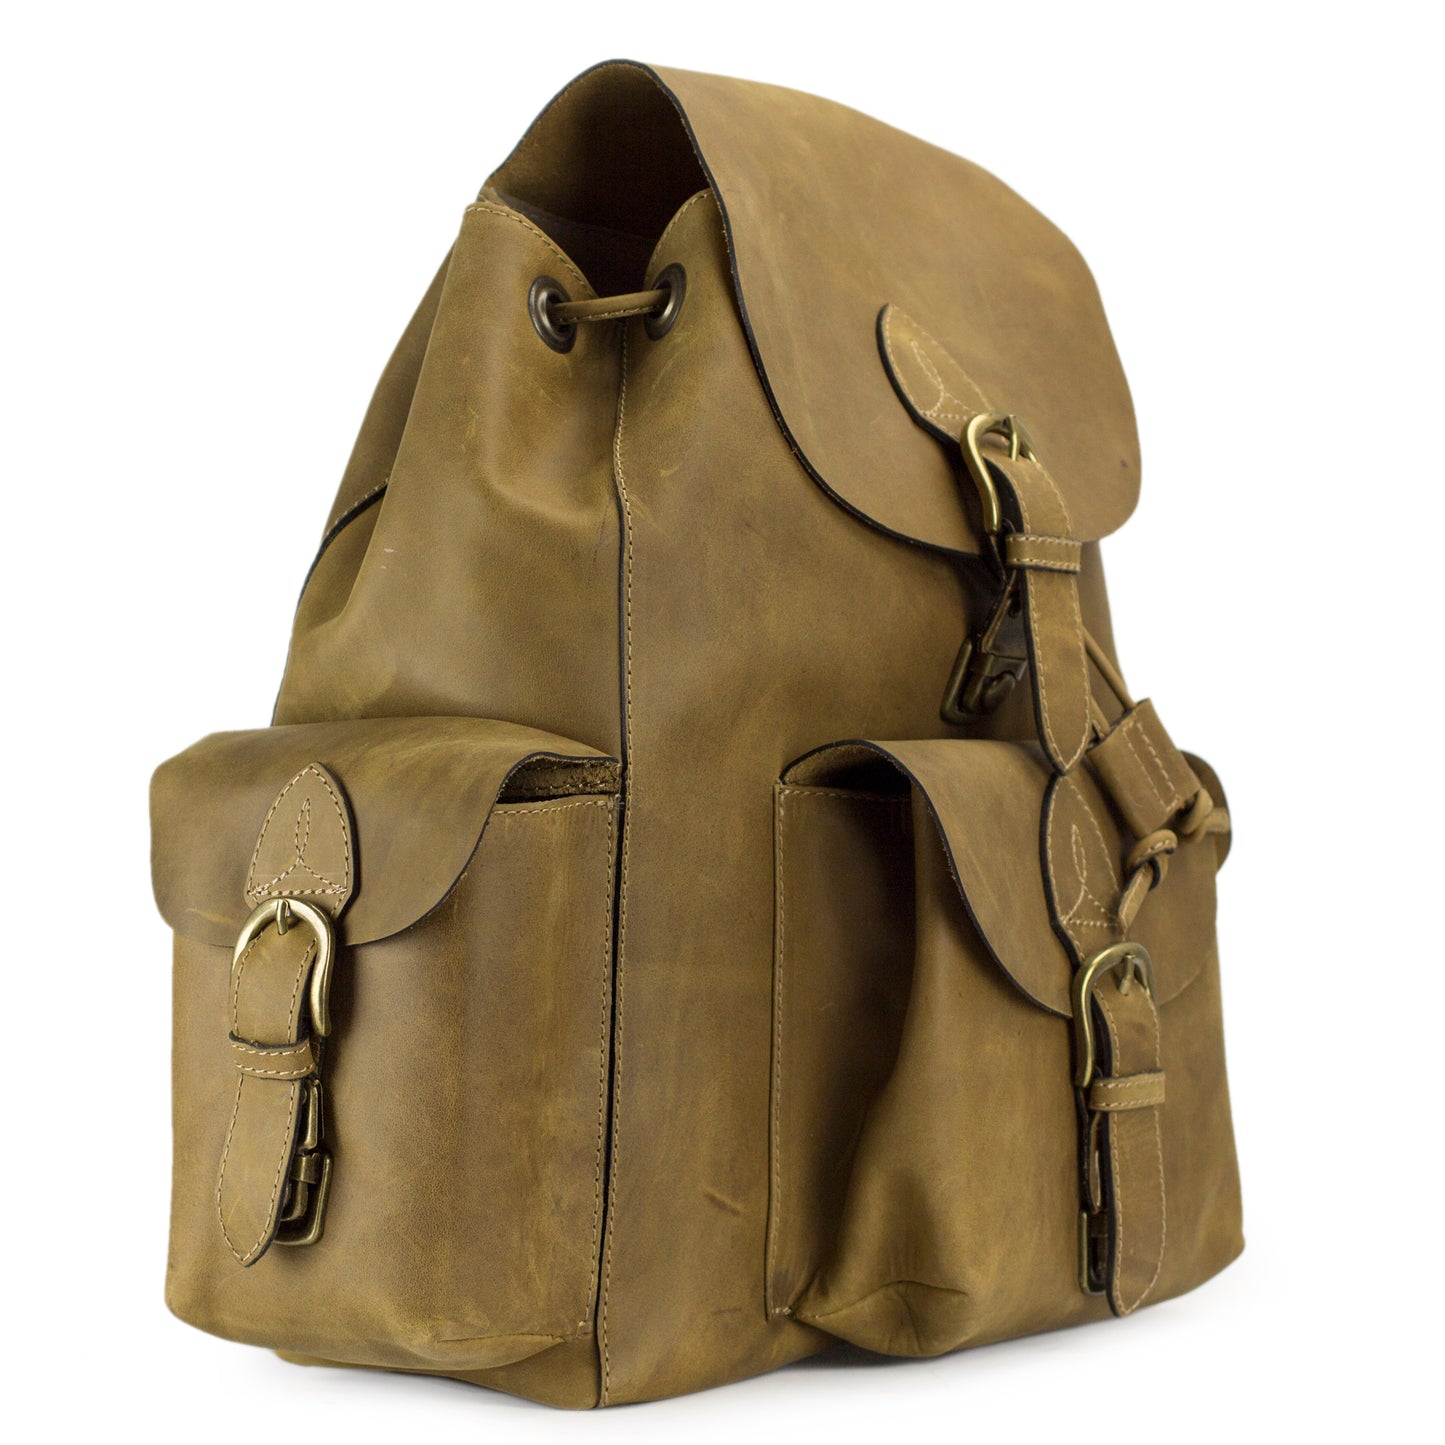 Weathered in Honey Brown Hand Crafted Leather Backpack from Mexico